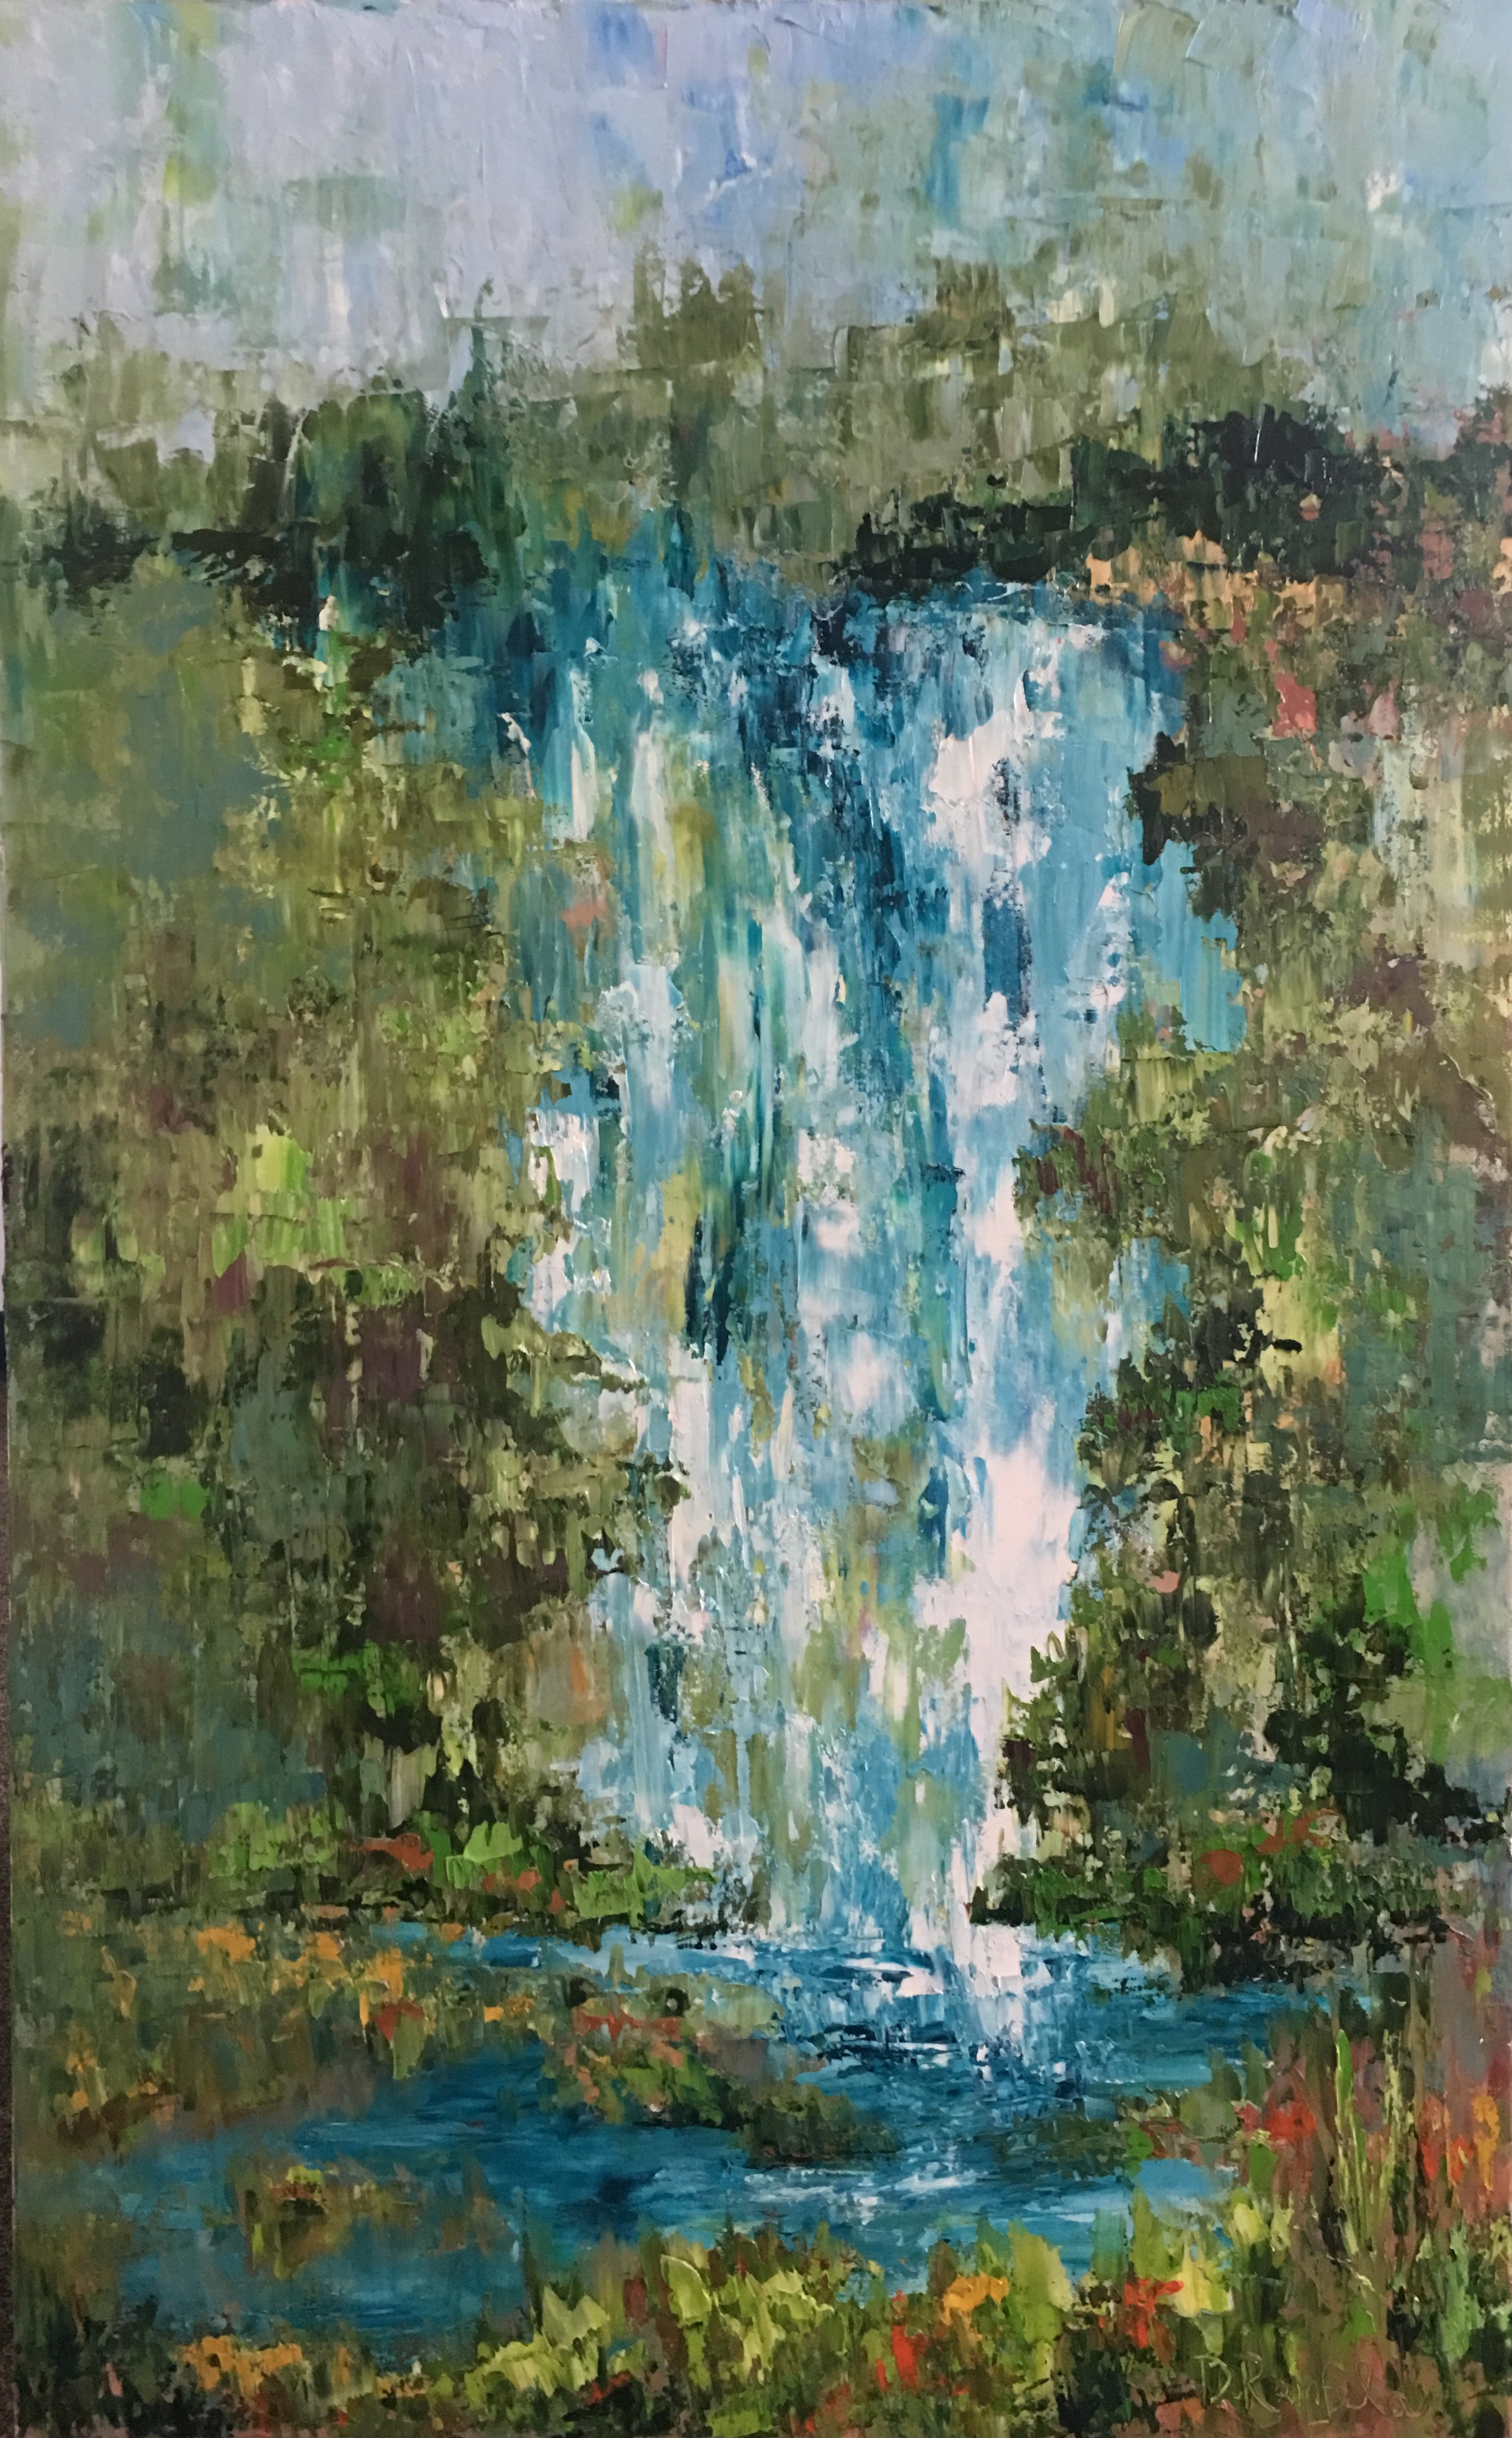 The Soul's Oasis, oil on canvas, 48"x30" SOLD